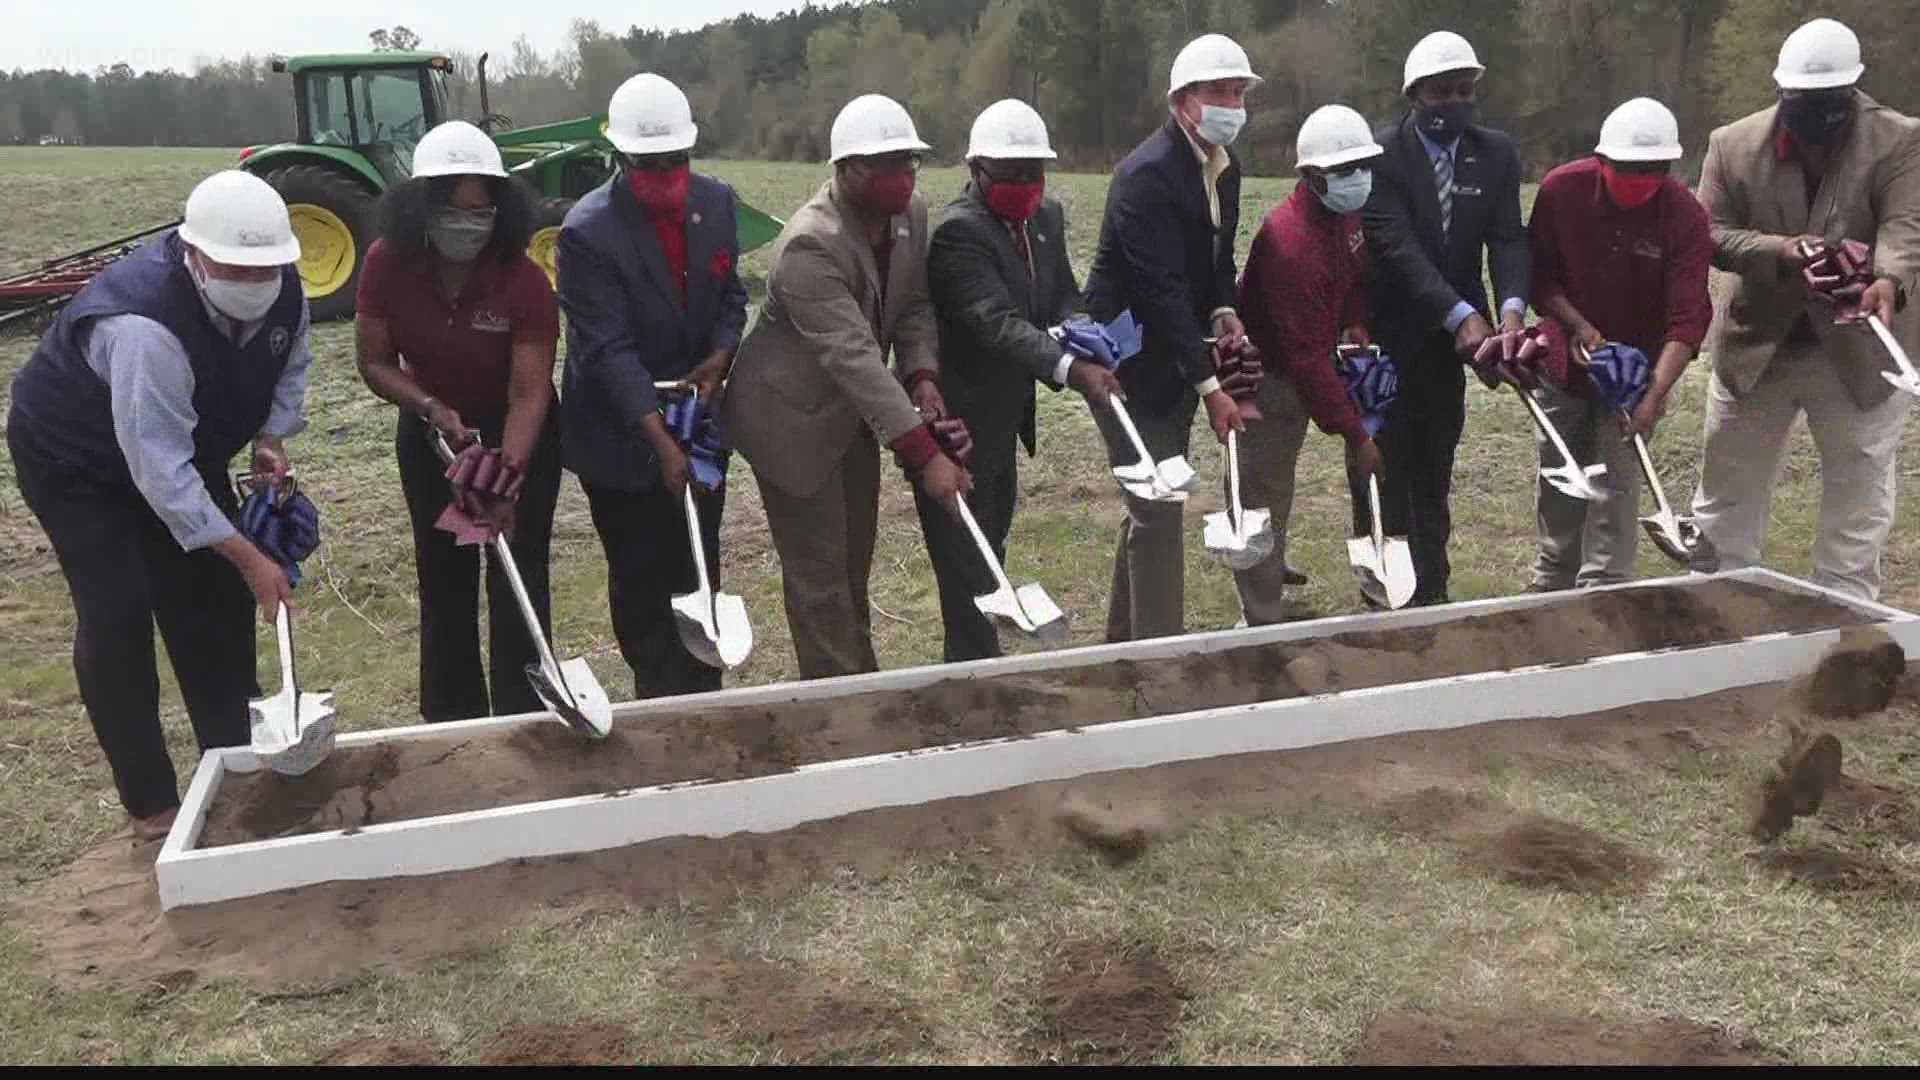 SC State University broke ground on nearly 200 acres to serve as a test site for farming technology.